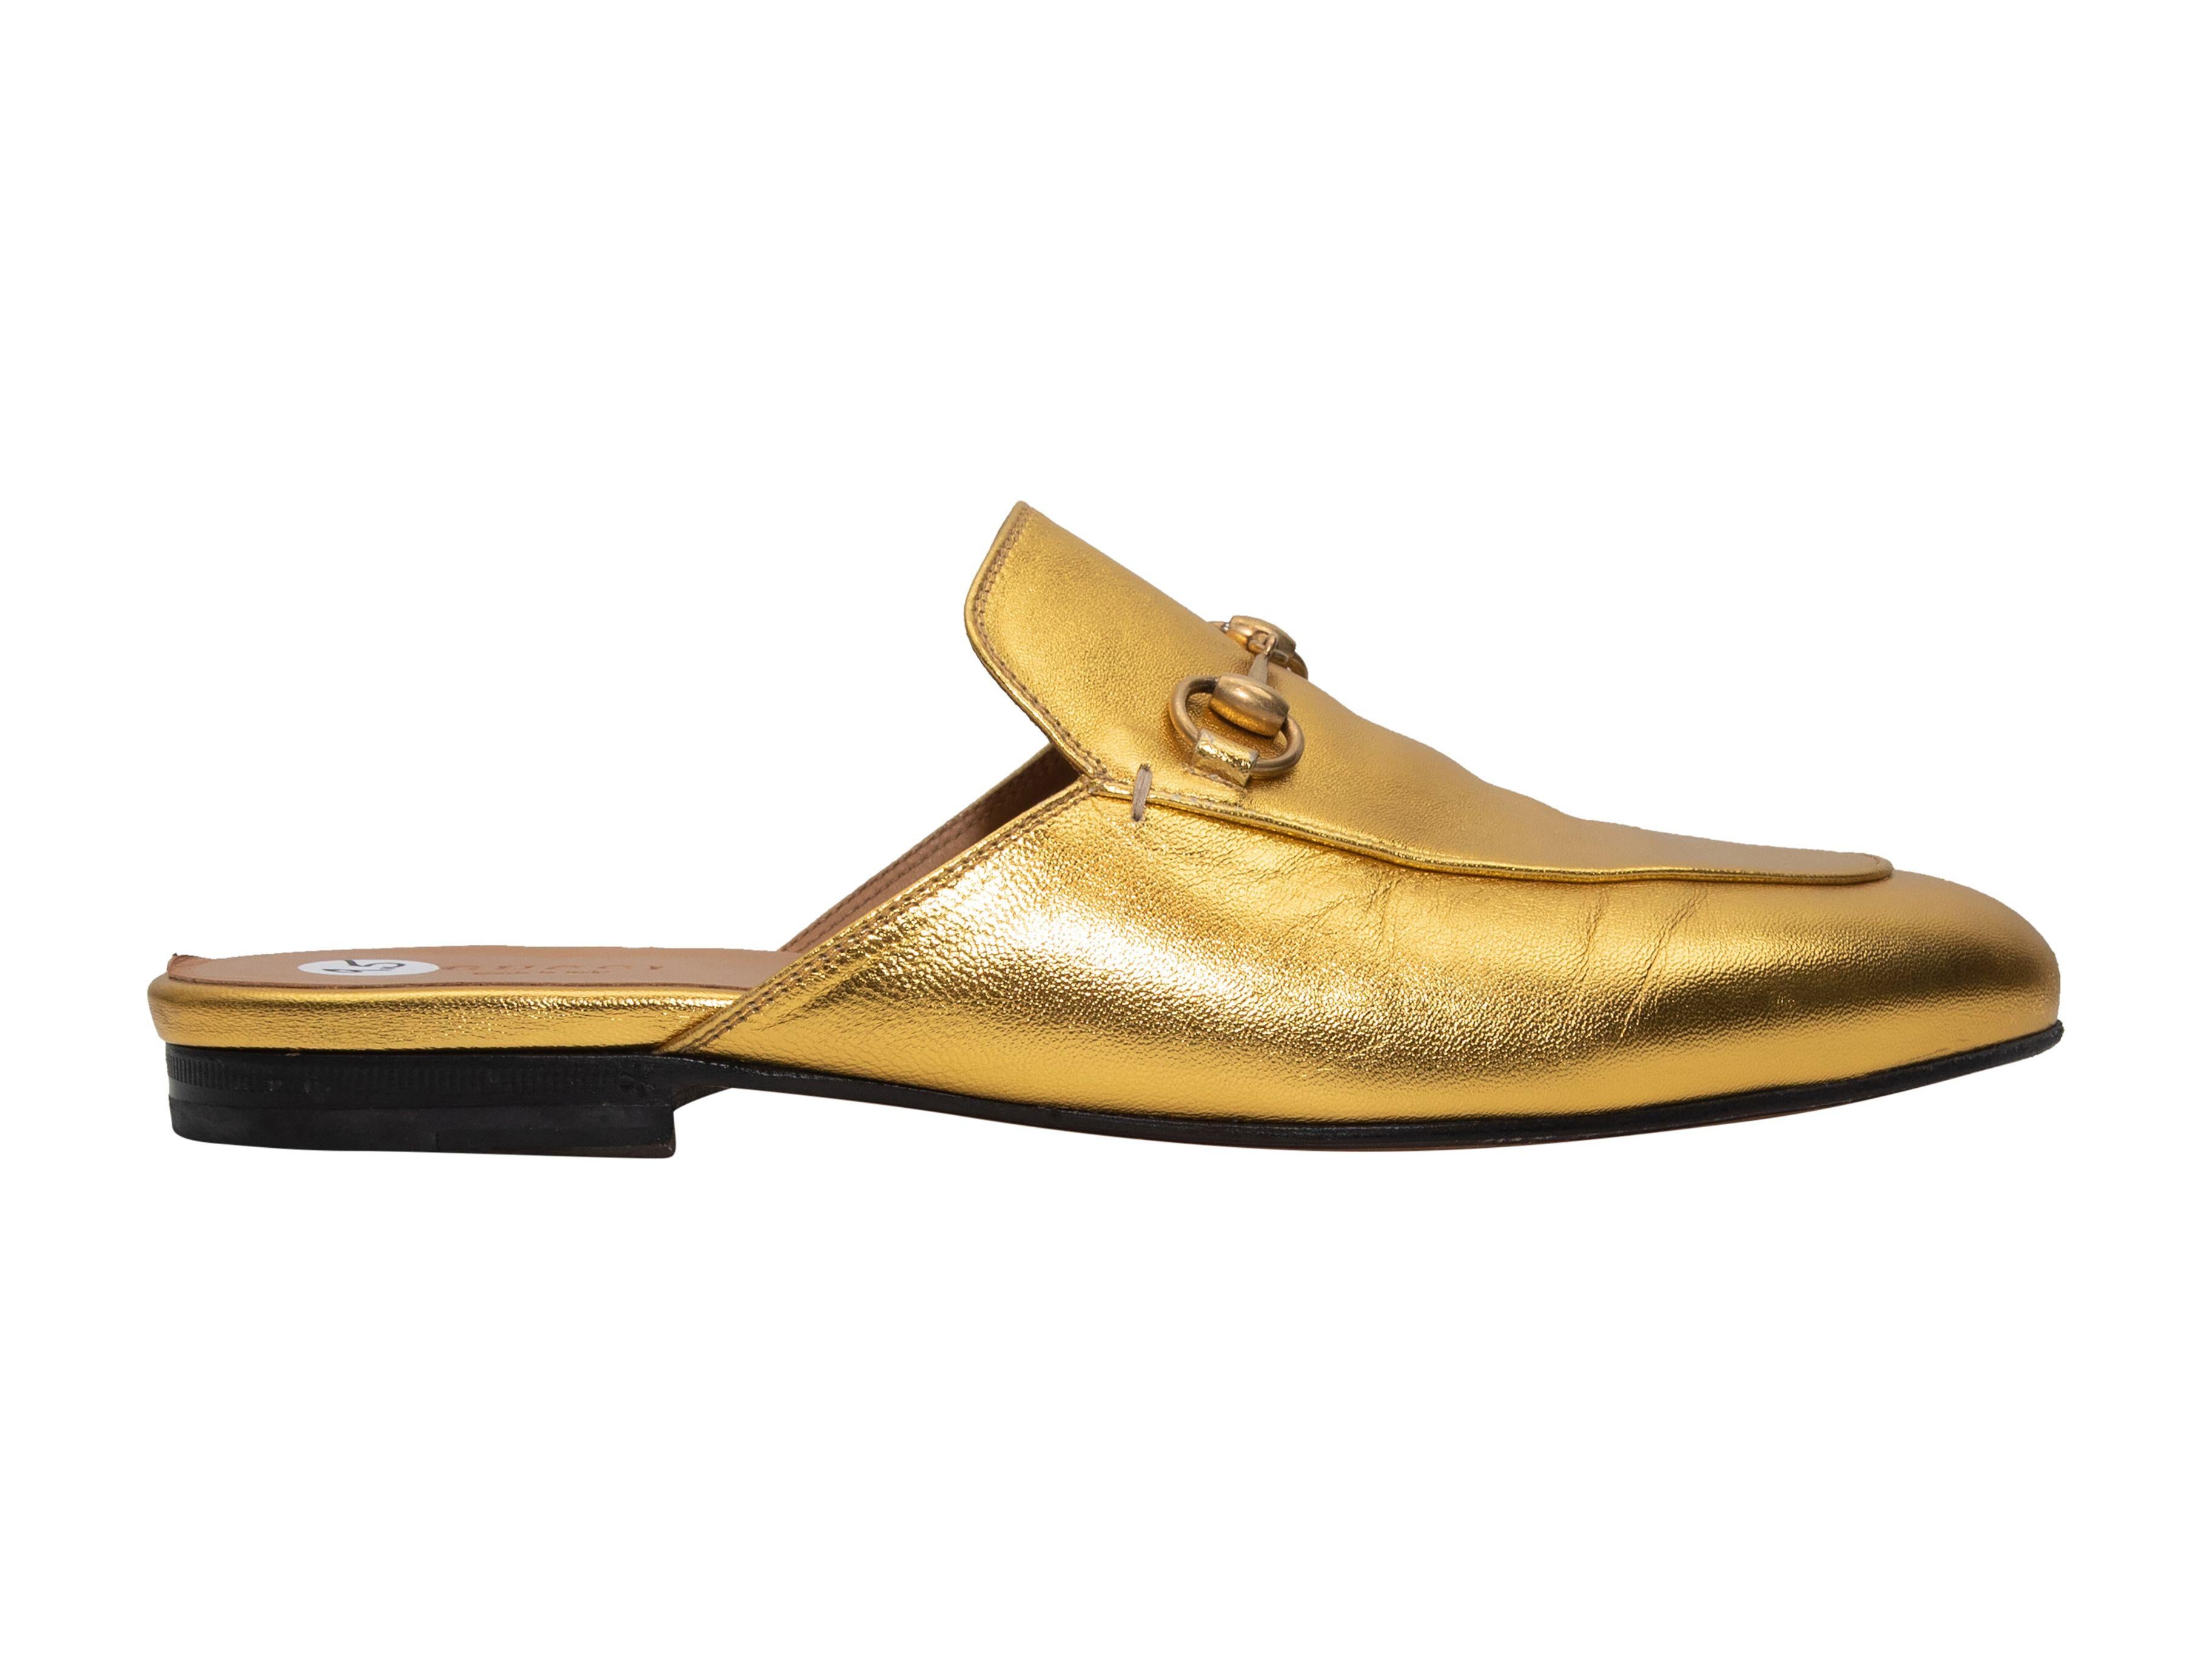 Brown Gucci Gold Princetown Metallic Loafer Mules